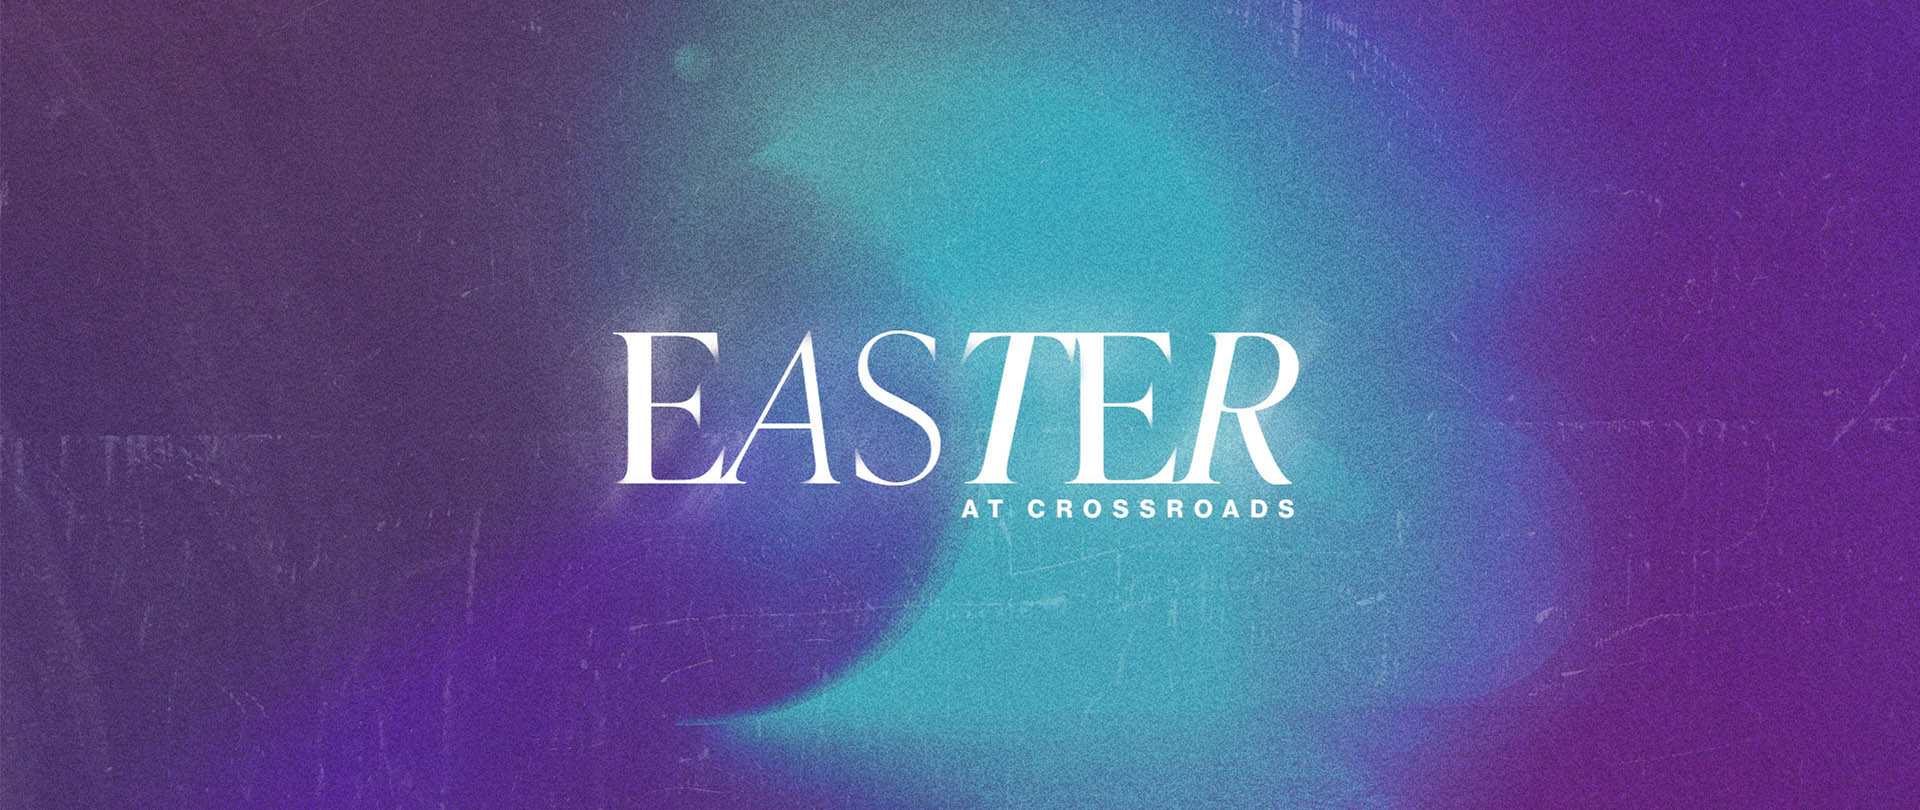 Easter at Crossroads
Sunday, April 9  |  9:00 & 11:00 AM
 
